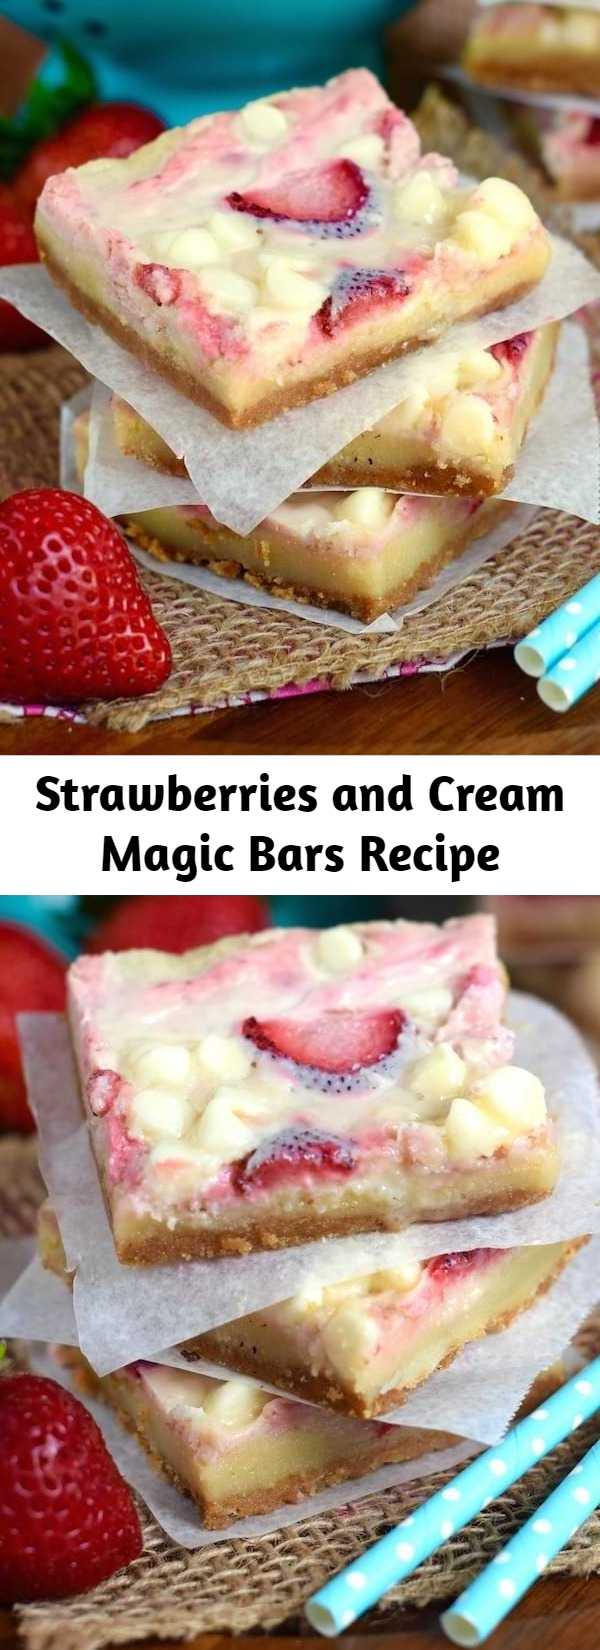 Strawberries and Cream Magic Bars Recipe - These Strawberries and Cream Magic Bars are pure magic.  Made with fresh strawberries and a sugar cookie layer, they are seriously amazing!